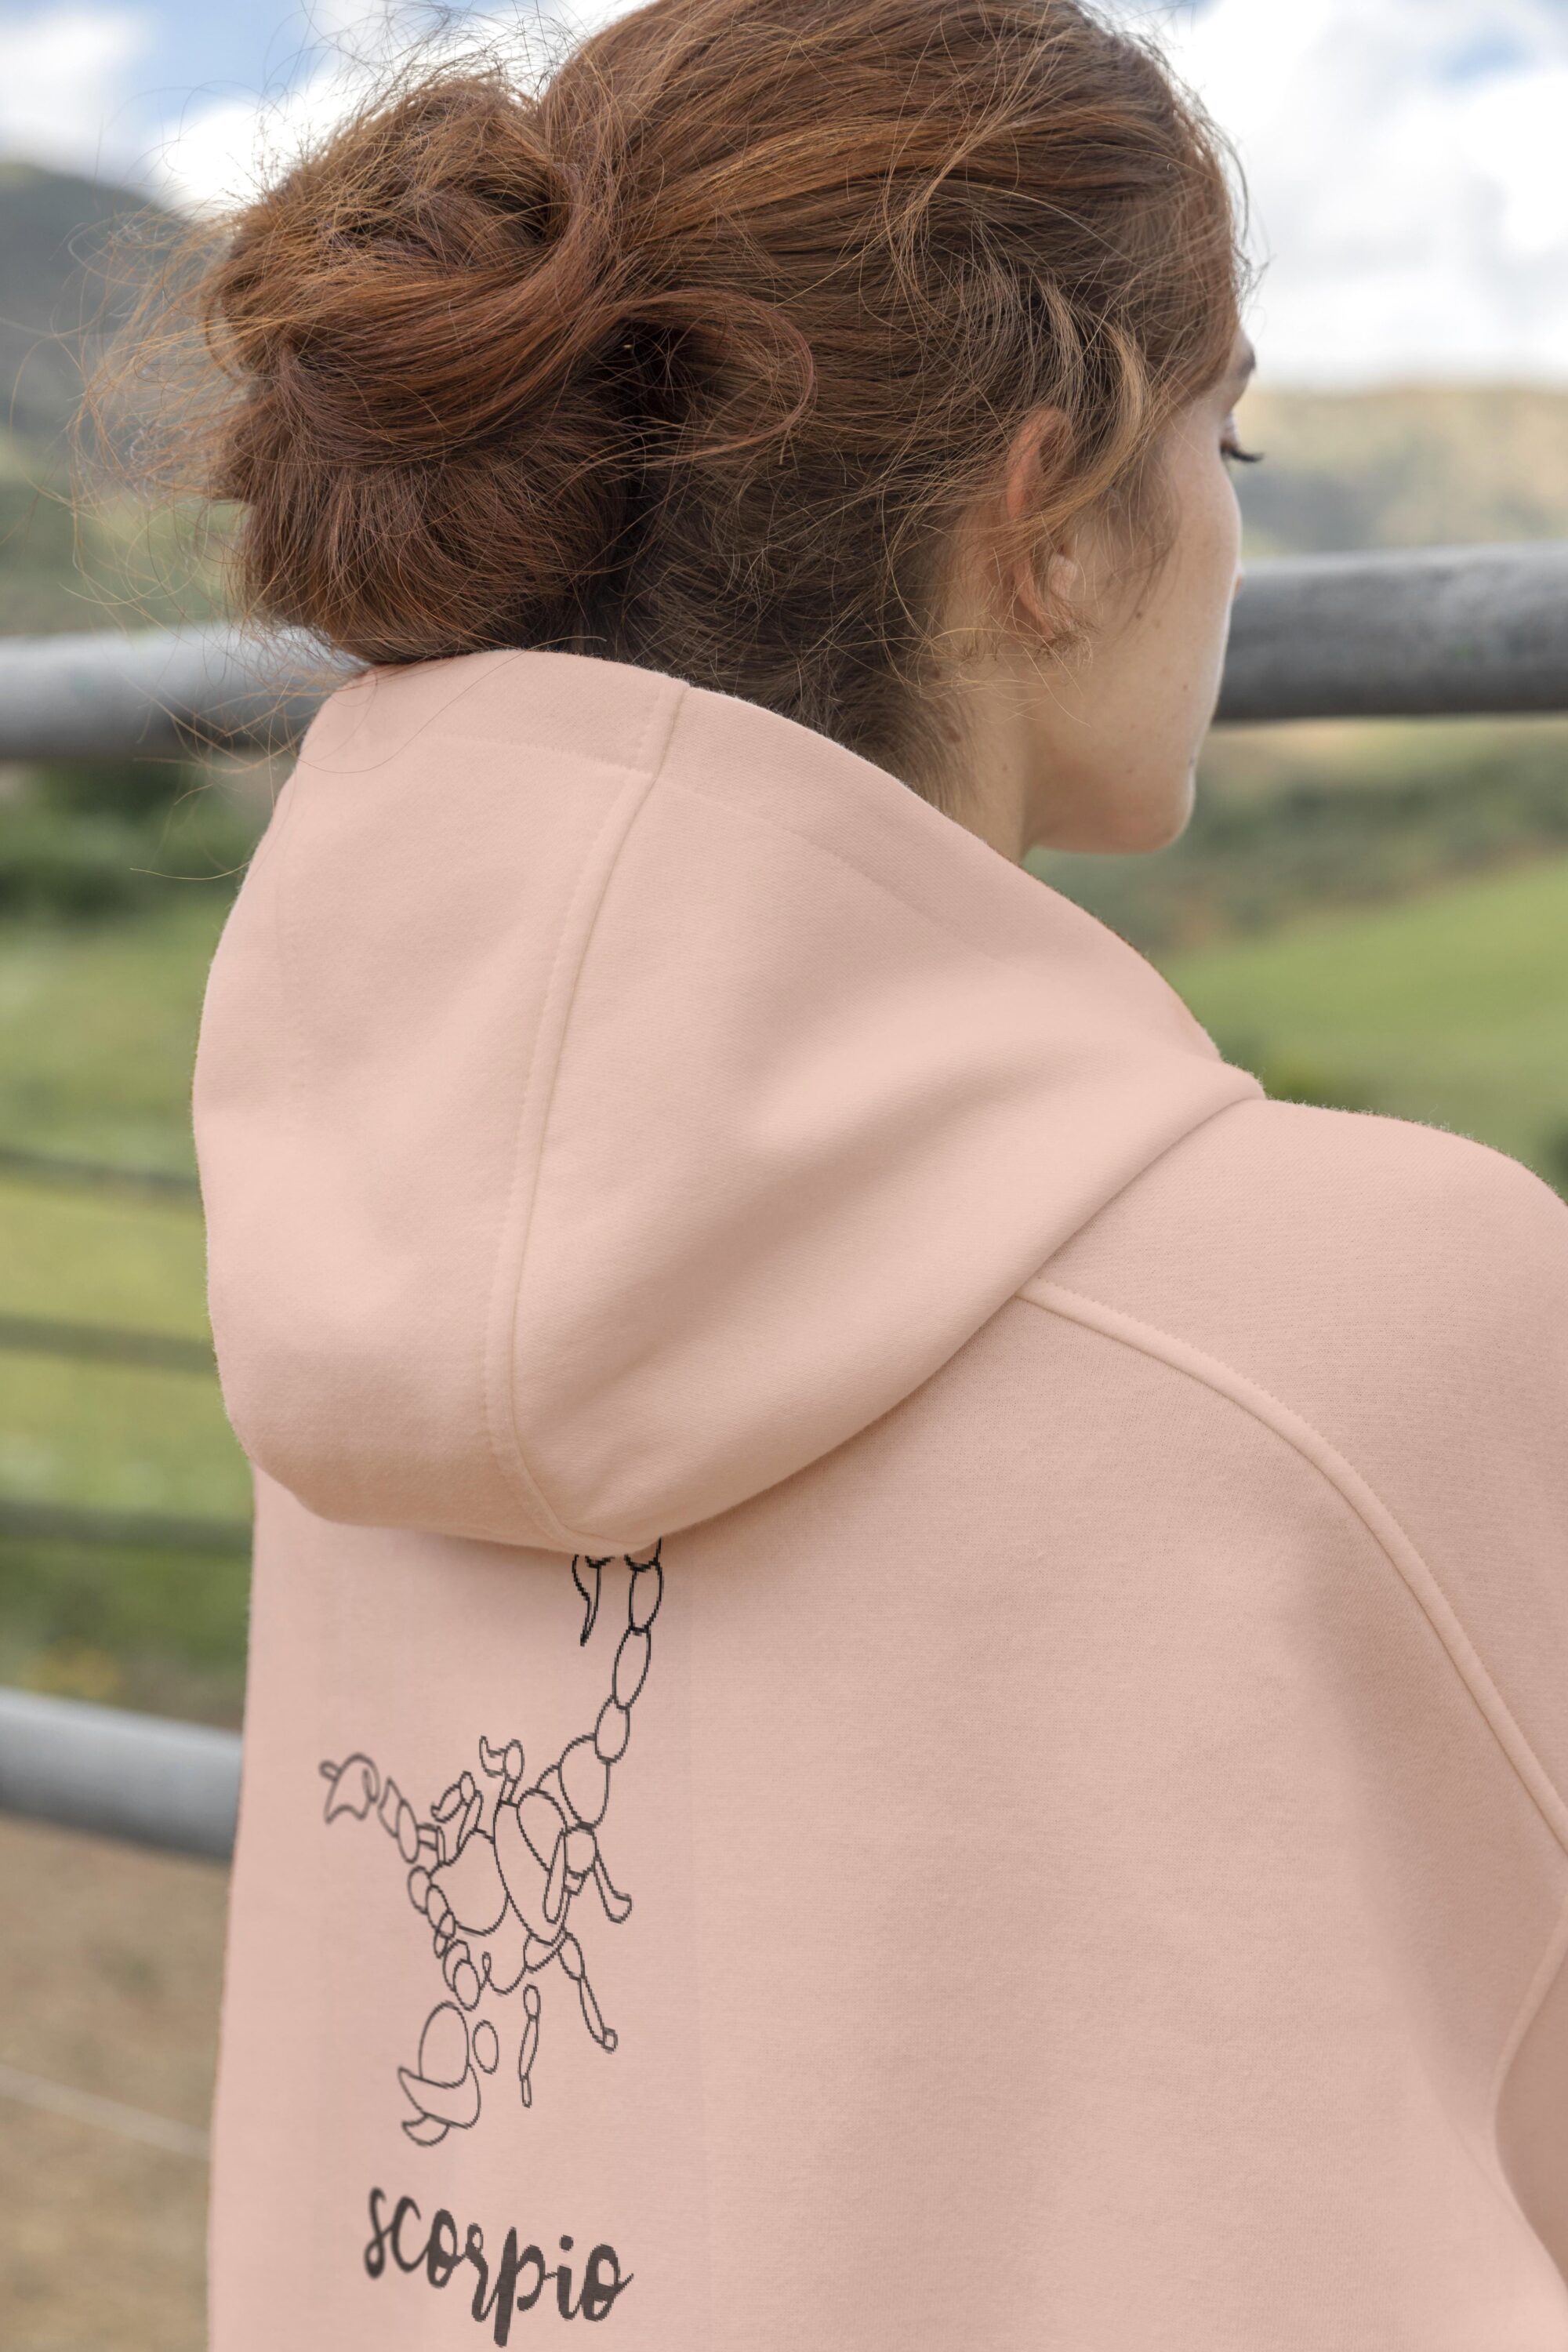 Woman in a pink hoodie looking out over a fence.